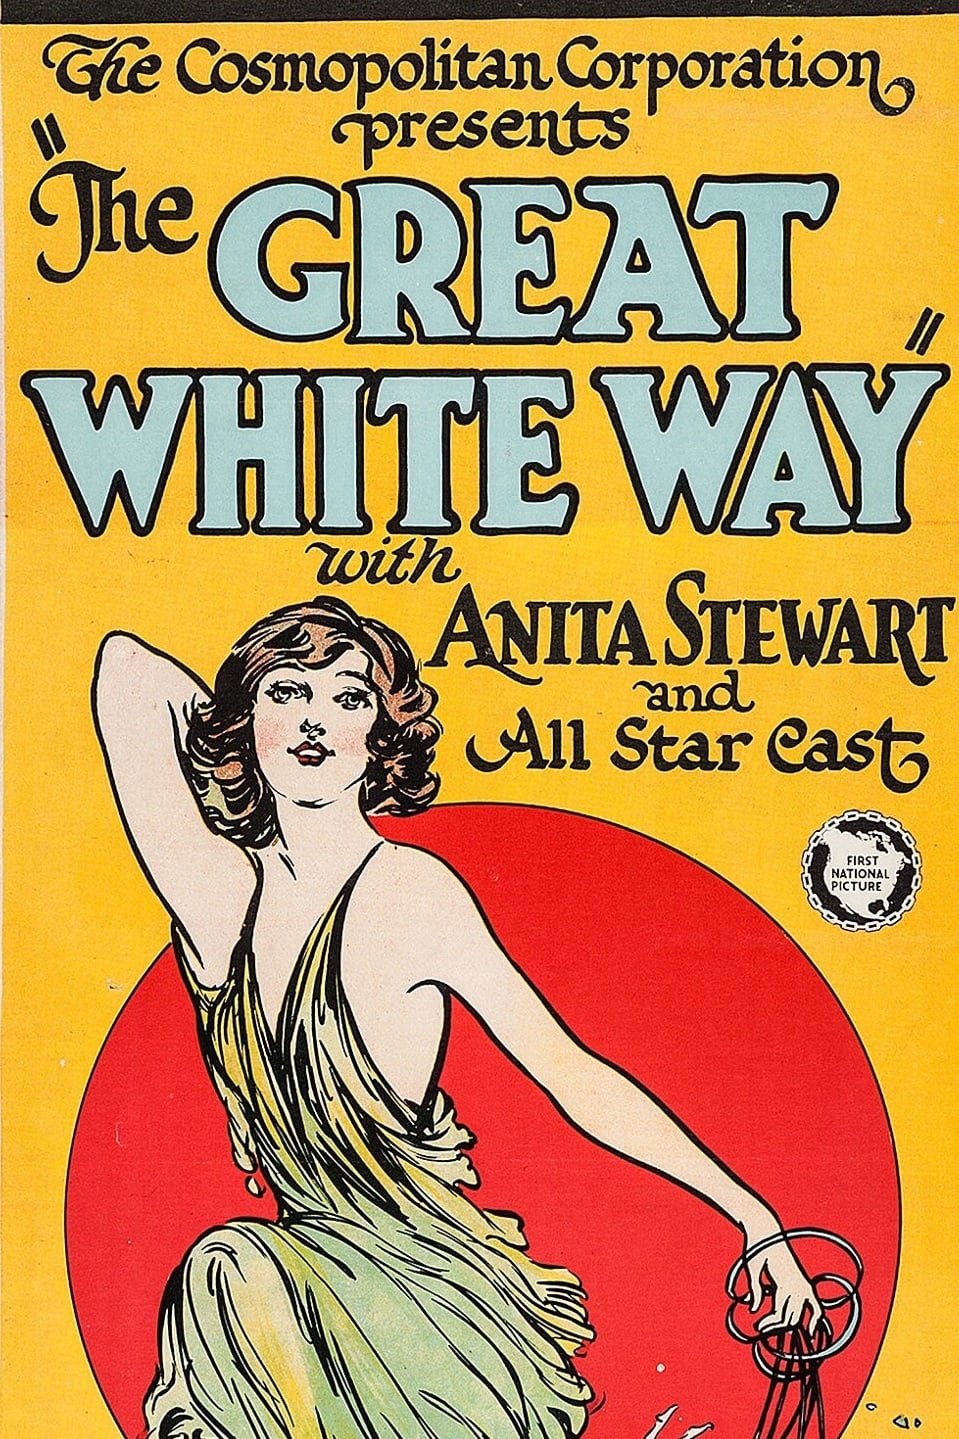 The Great White Way